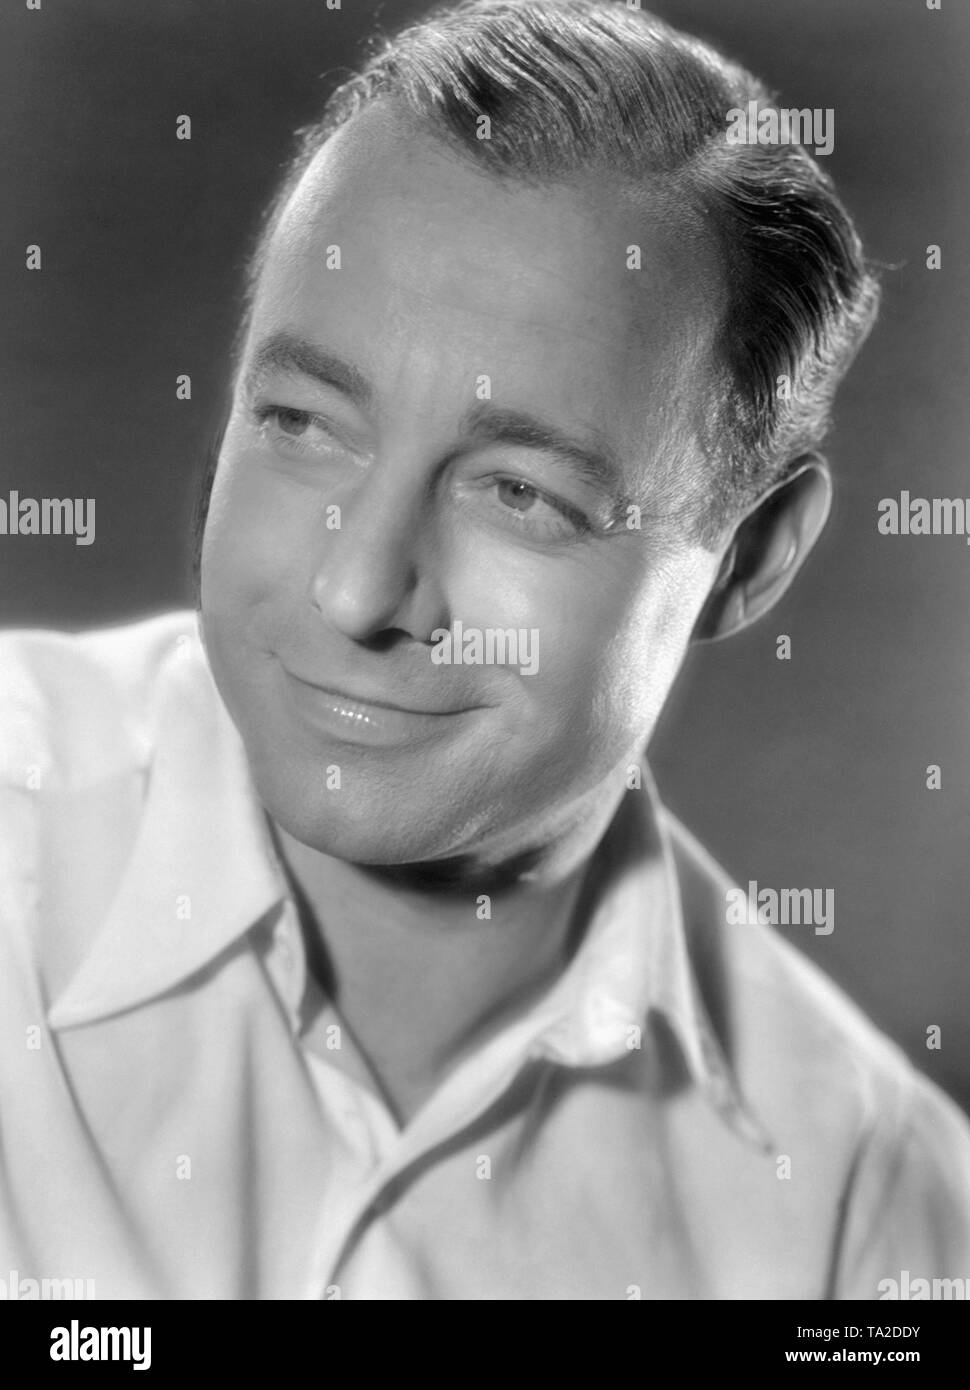 Portrait of the actor Heinz Ruehmann from the film comedy 'Hurrah! I'm a Papa ' In this film by Kurt Hoffmann Heinz Ruehmann plays an eternal student who unexpectedly becomes a father. Stock Photo